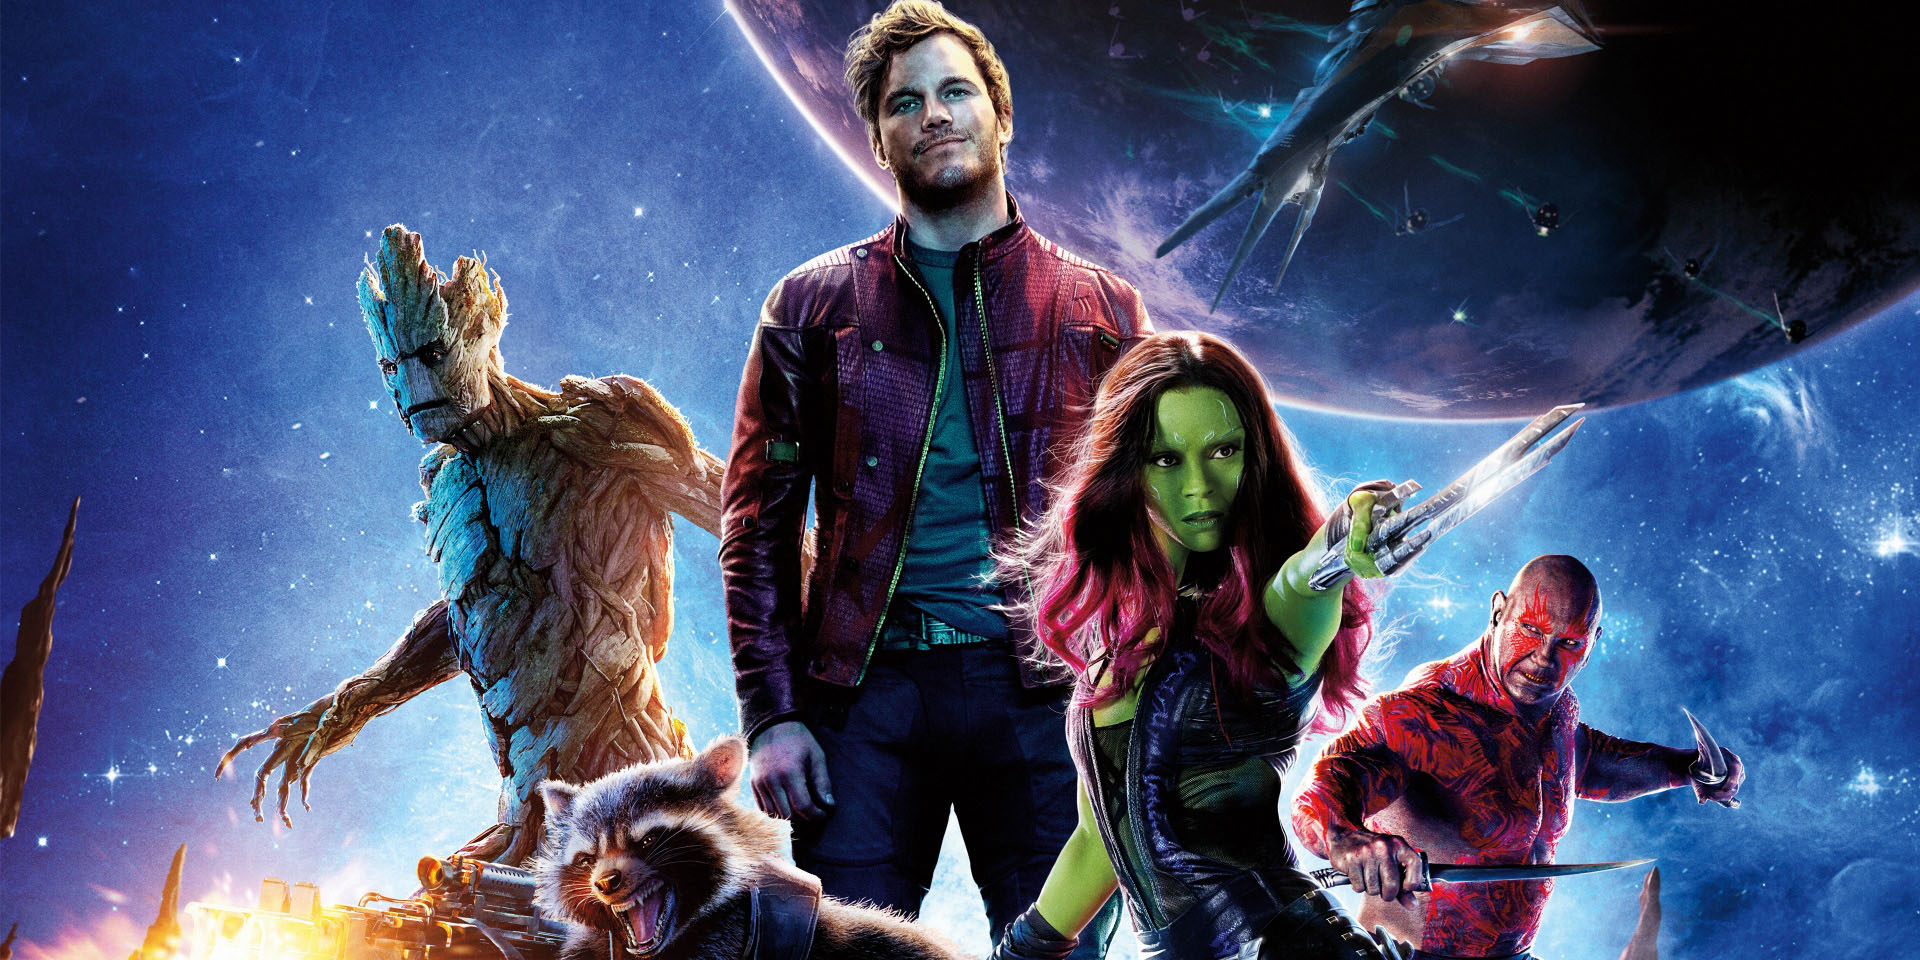 James Gunn Reveals the Title for Guardians of the Galaxy 2